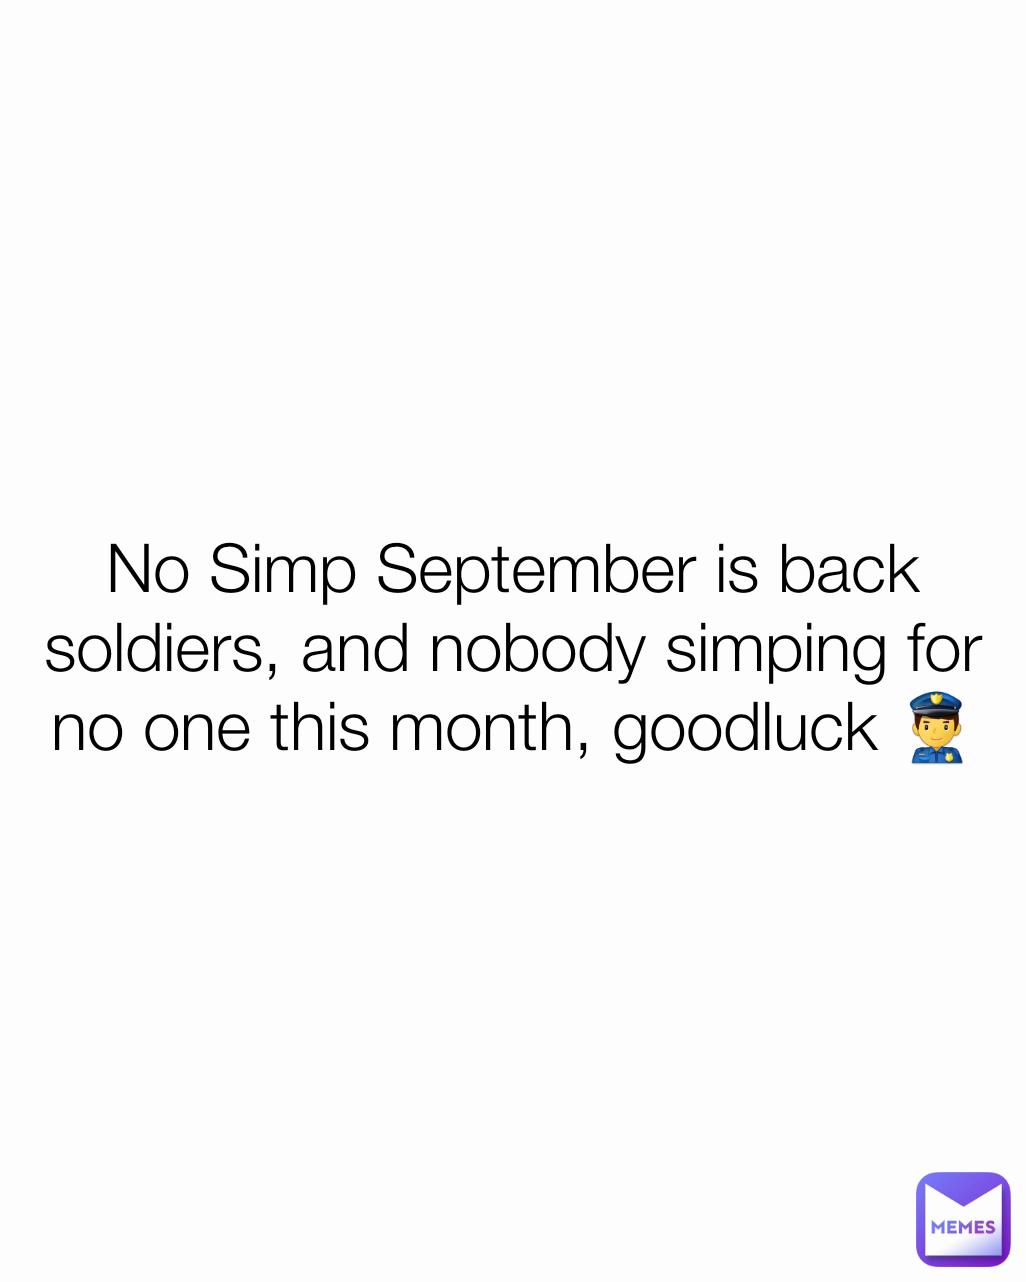 No Simp September is back soldiers, and nobody simping for no one this month, goodluck 👮‍♂️